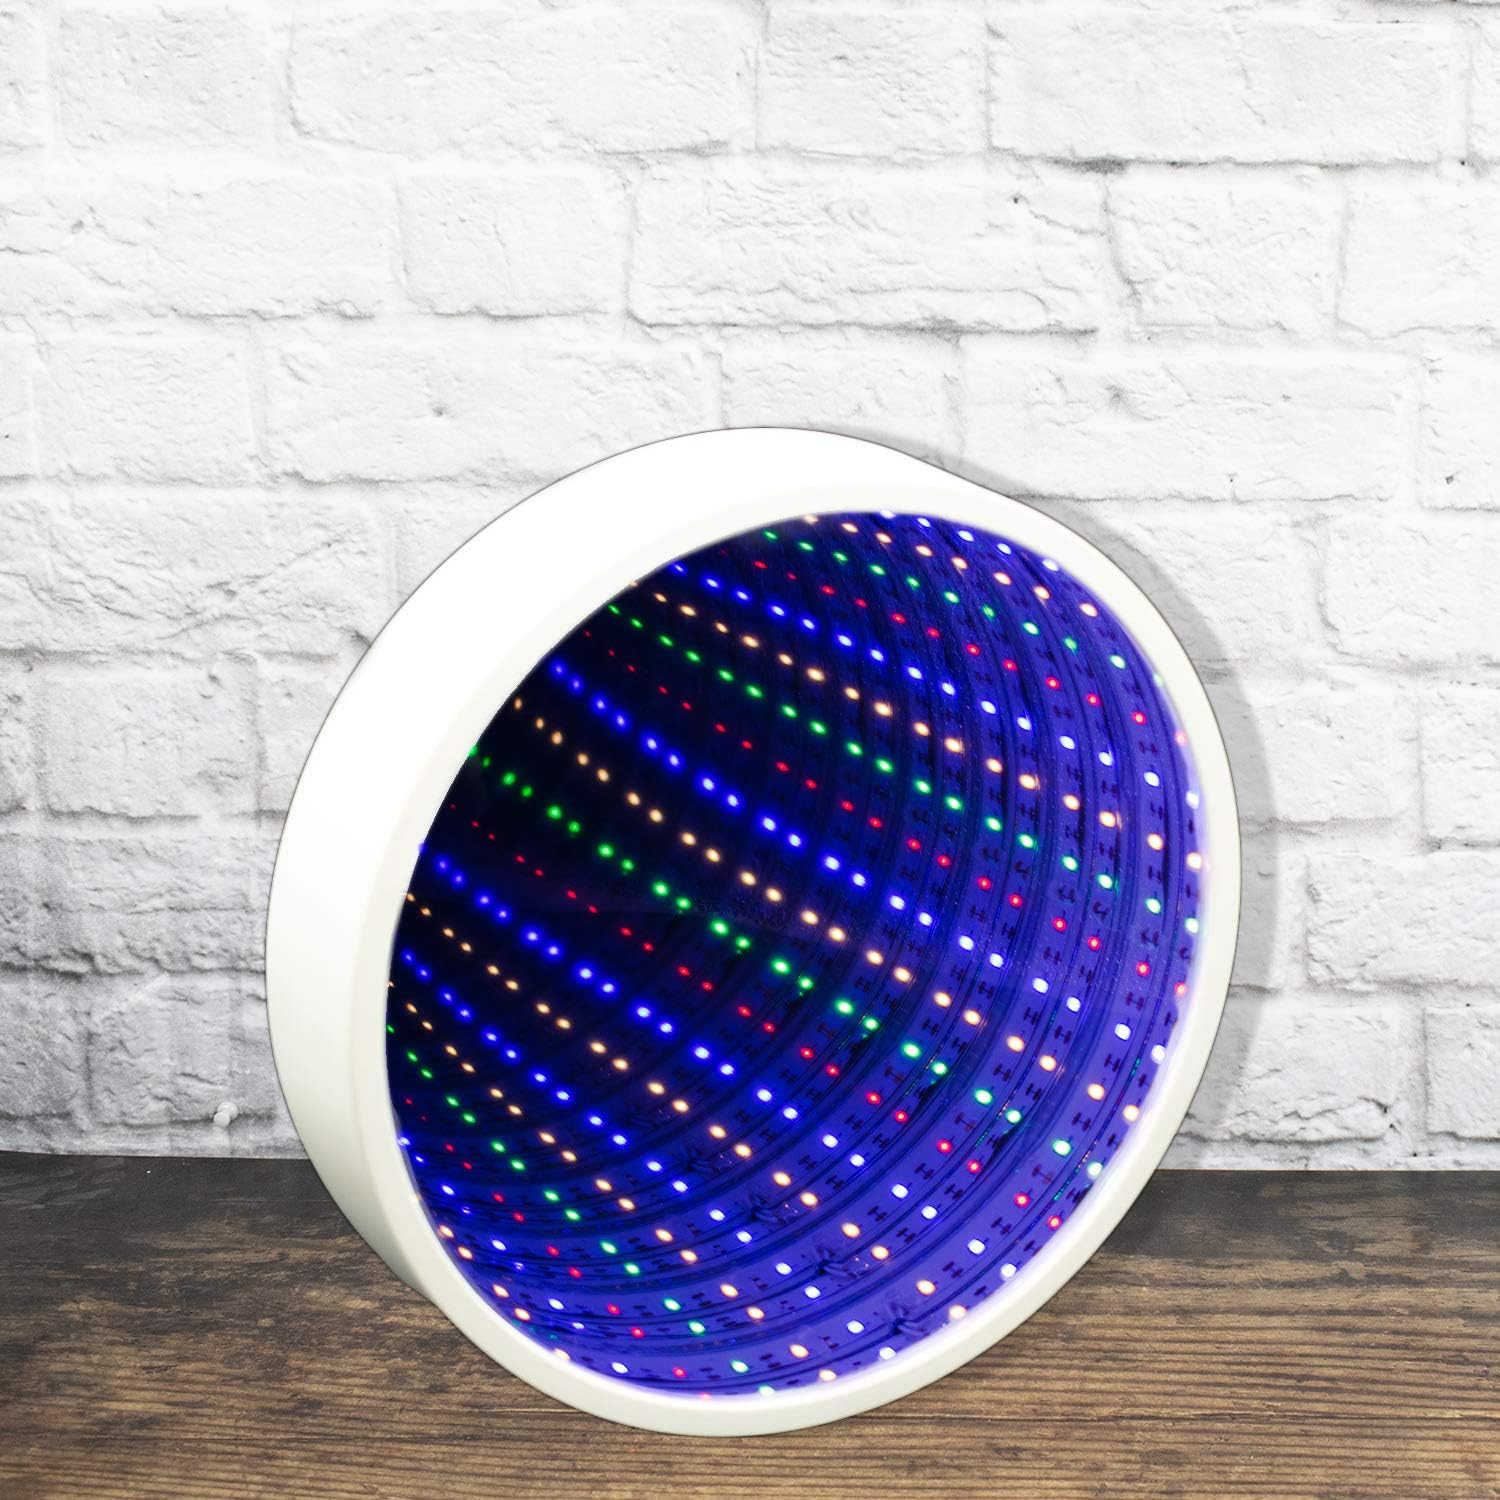 Infinity Mirror tunnel Light available in Star Shaped or Round